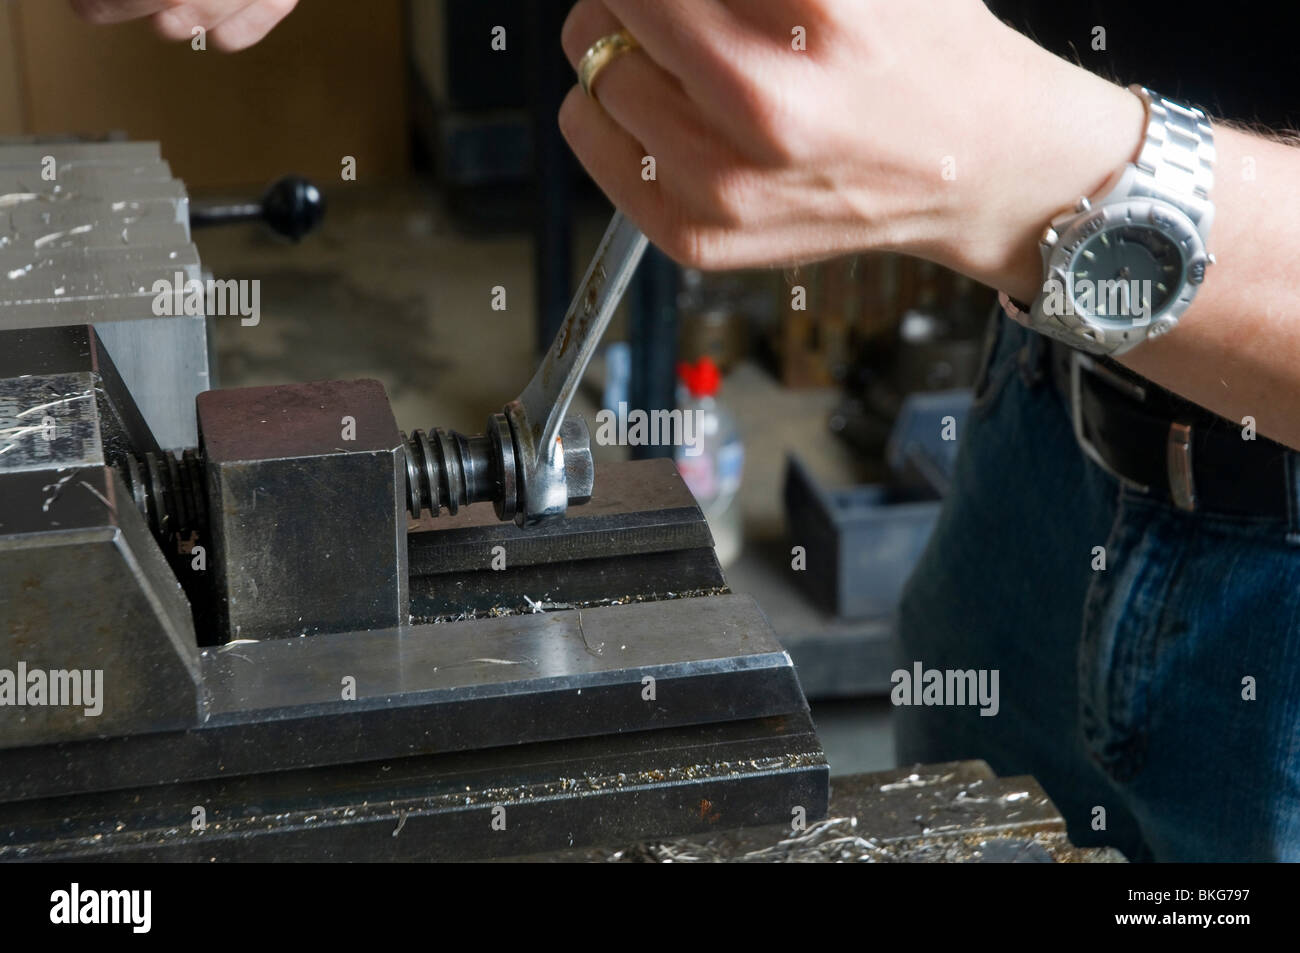 clamping a part in place in a milling machine using a machine vice, tightening with a spanner, precision engineering. Stock Photo